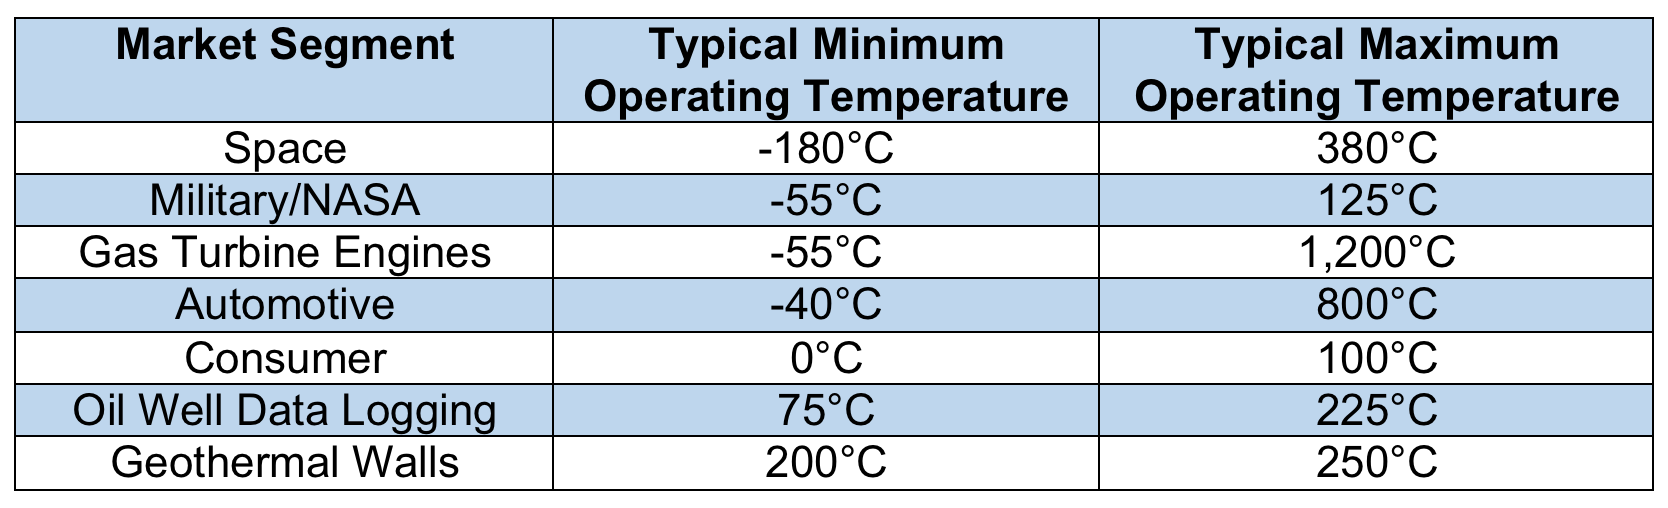 operating temperatures table